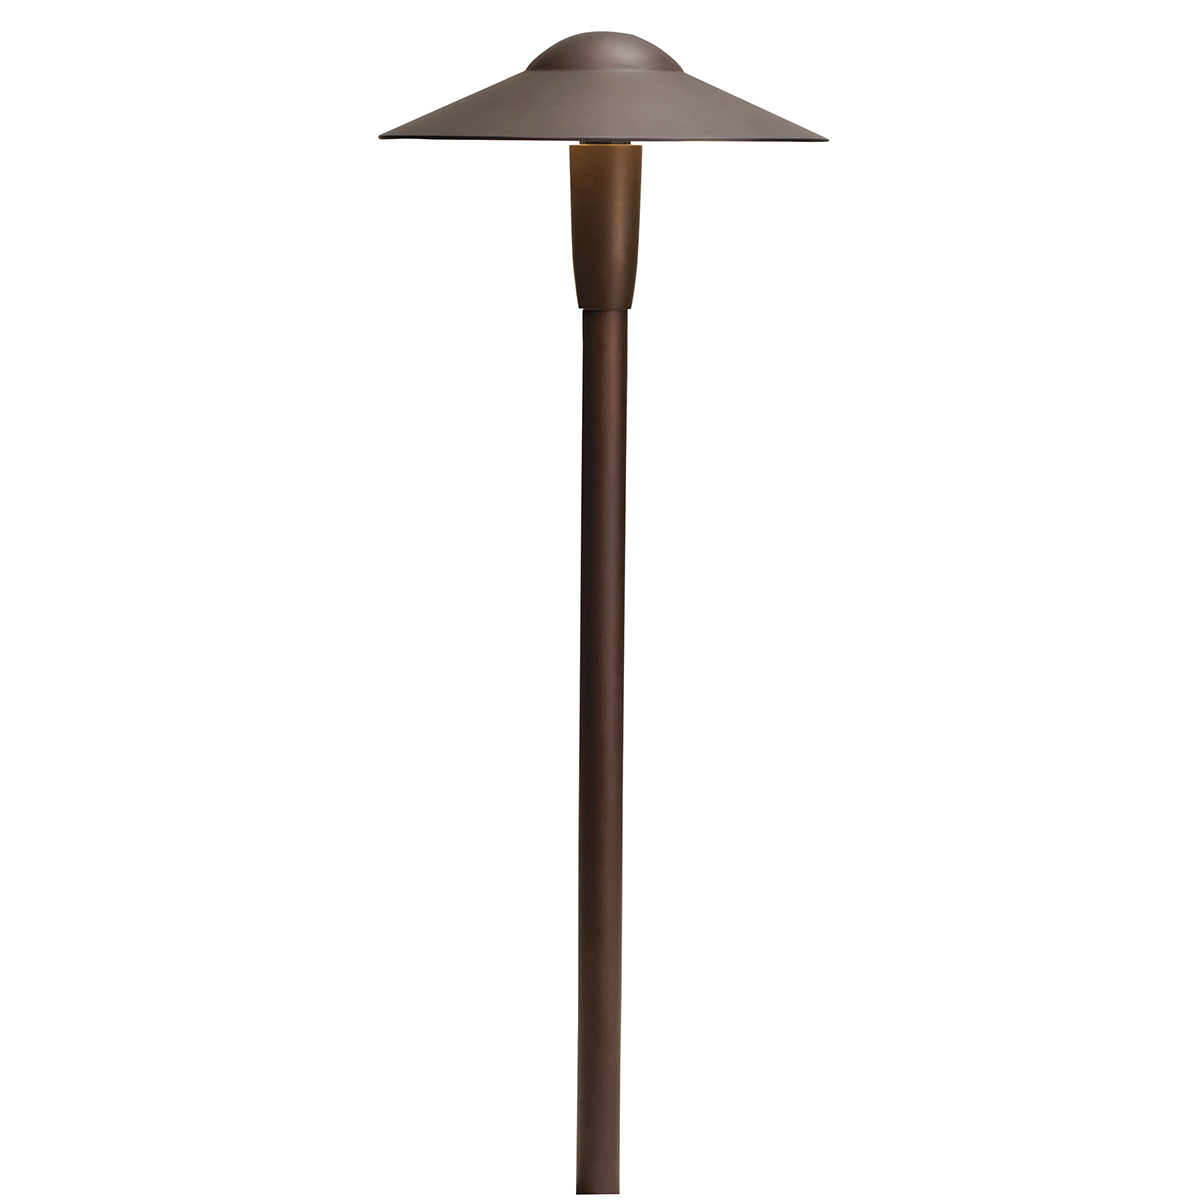 Kichler 15810AZT30R Led Dome Path Light in Textured Architectural Bronze